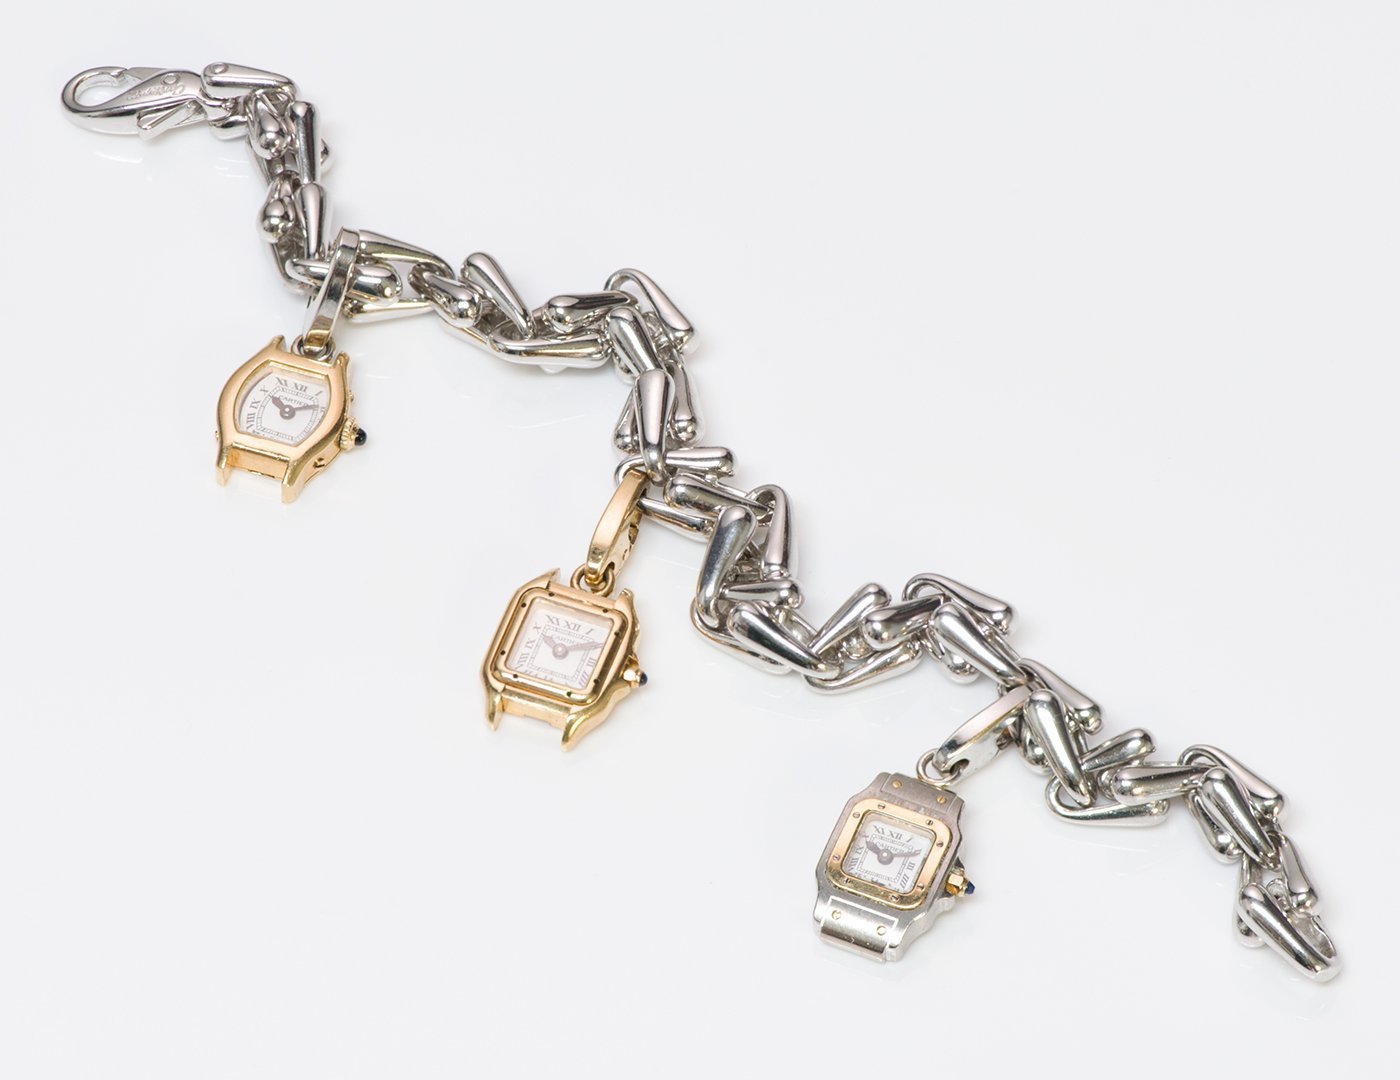 Three Little Known Facts About Cartier - DSF Antique Jewelry